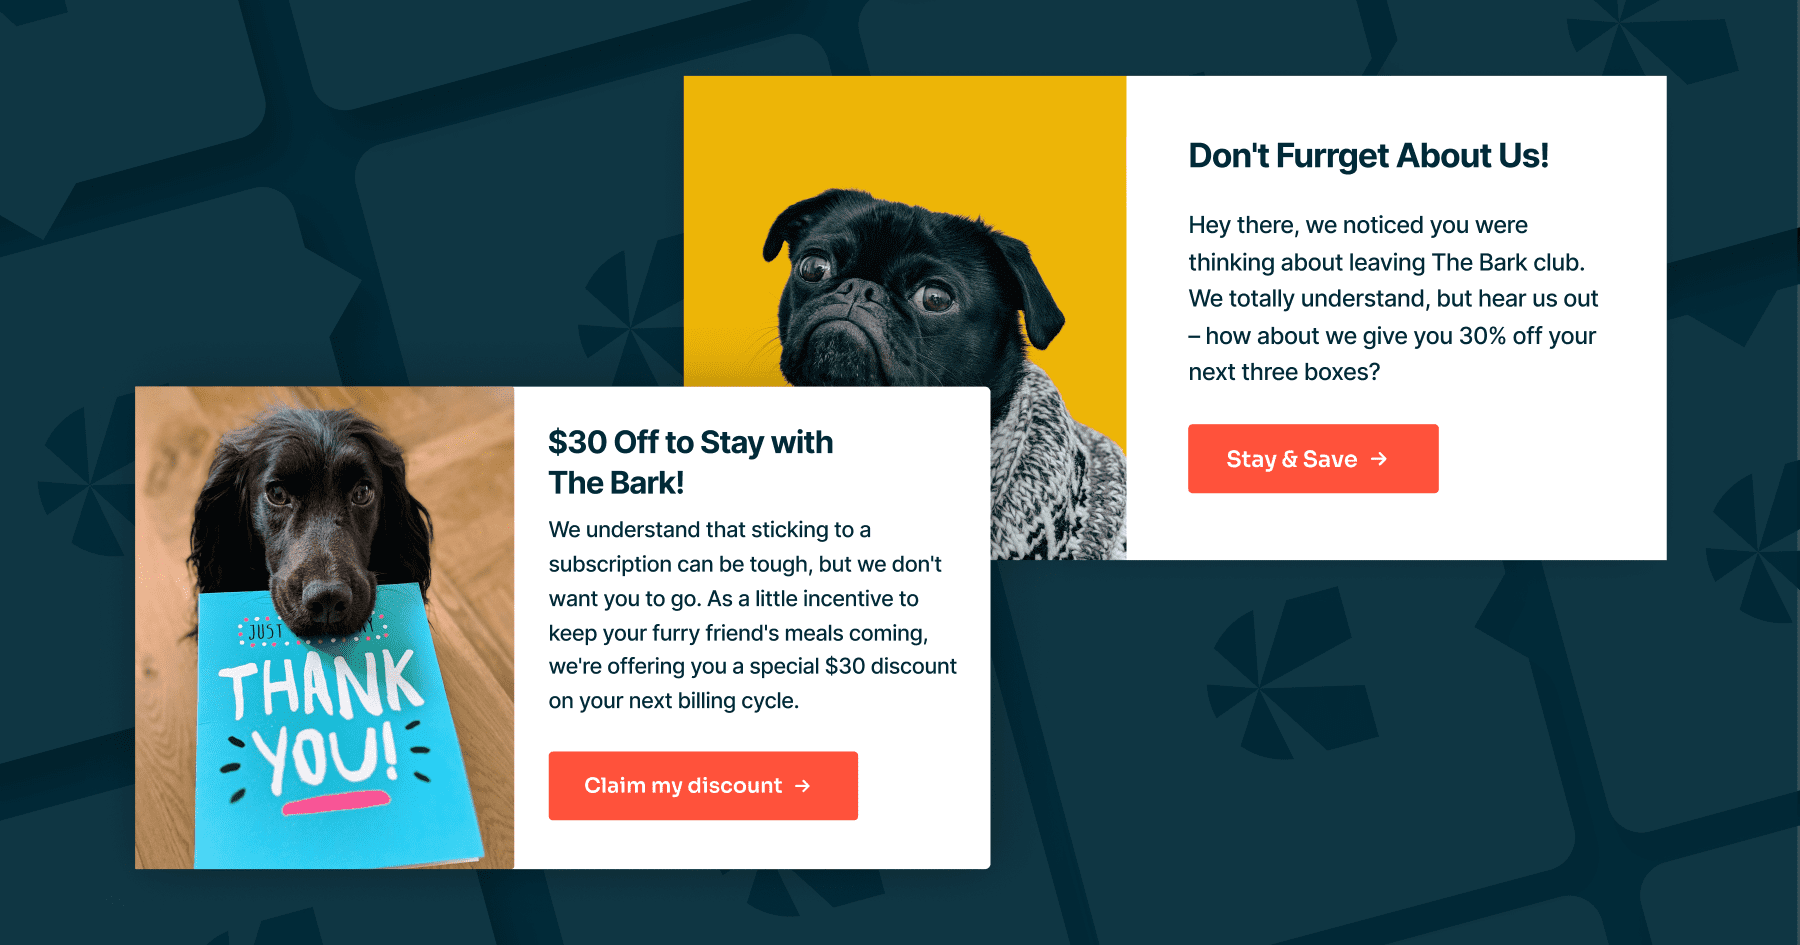 Creating Personalized Offers with Retention